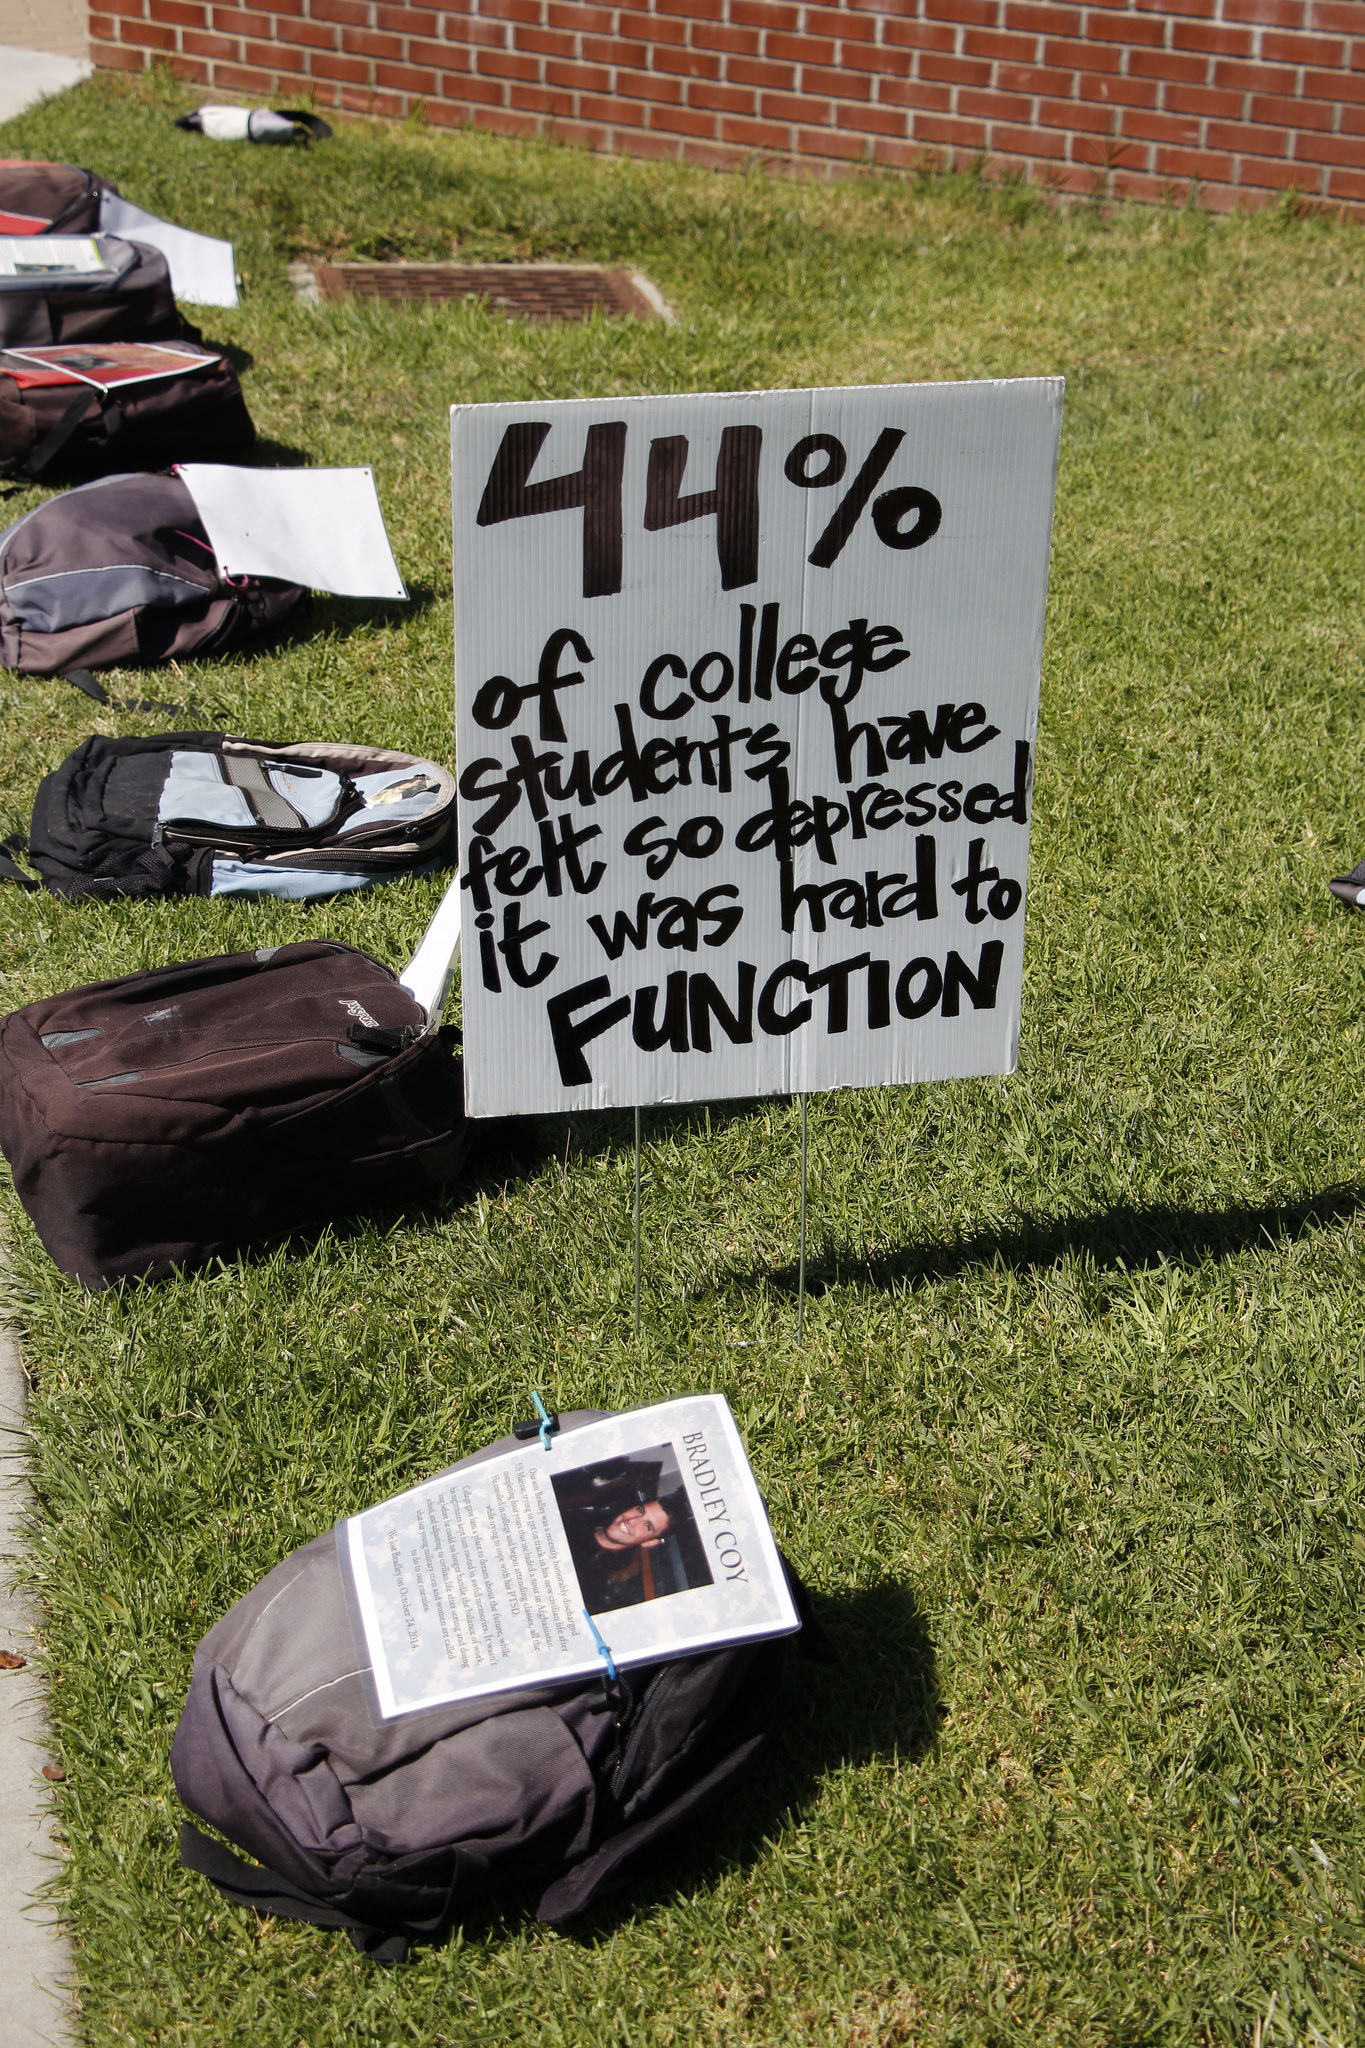 A moving statistic serves to send an important message to college students, part of the 'Send Silence Packing' event at Palomar College on Oct. 6, 2016. (Michael Schulte/The Telescope)